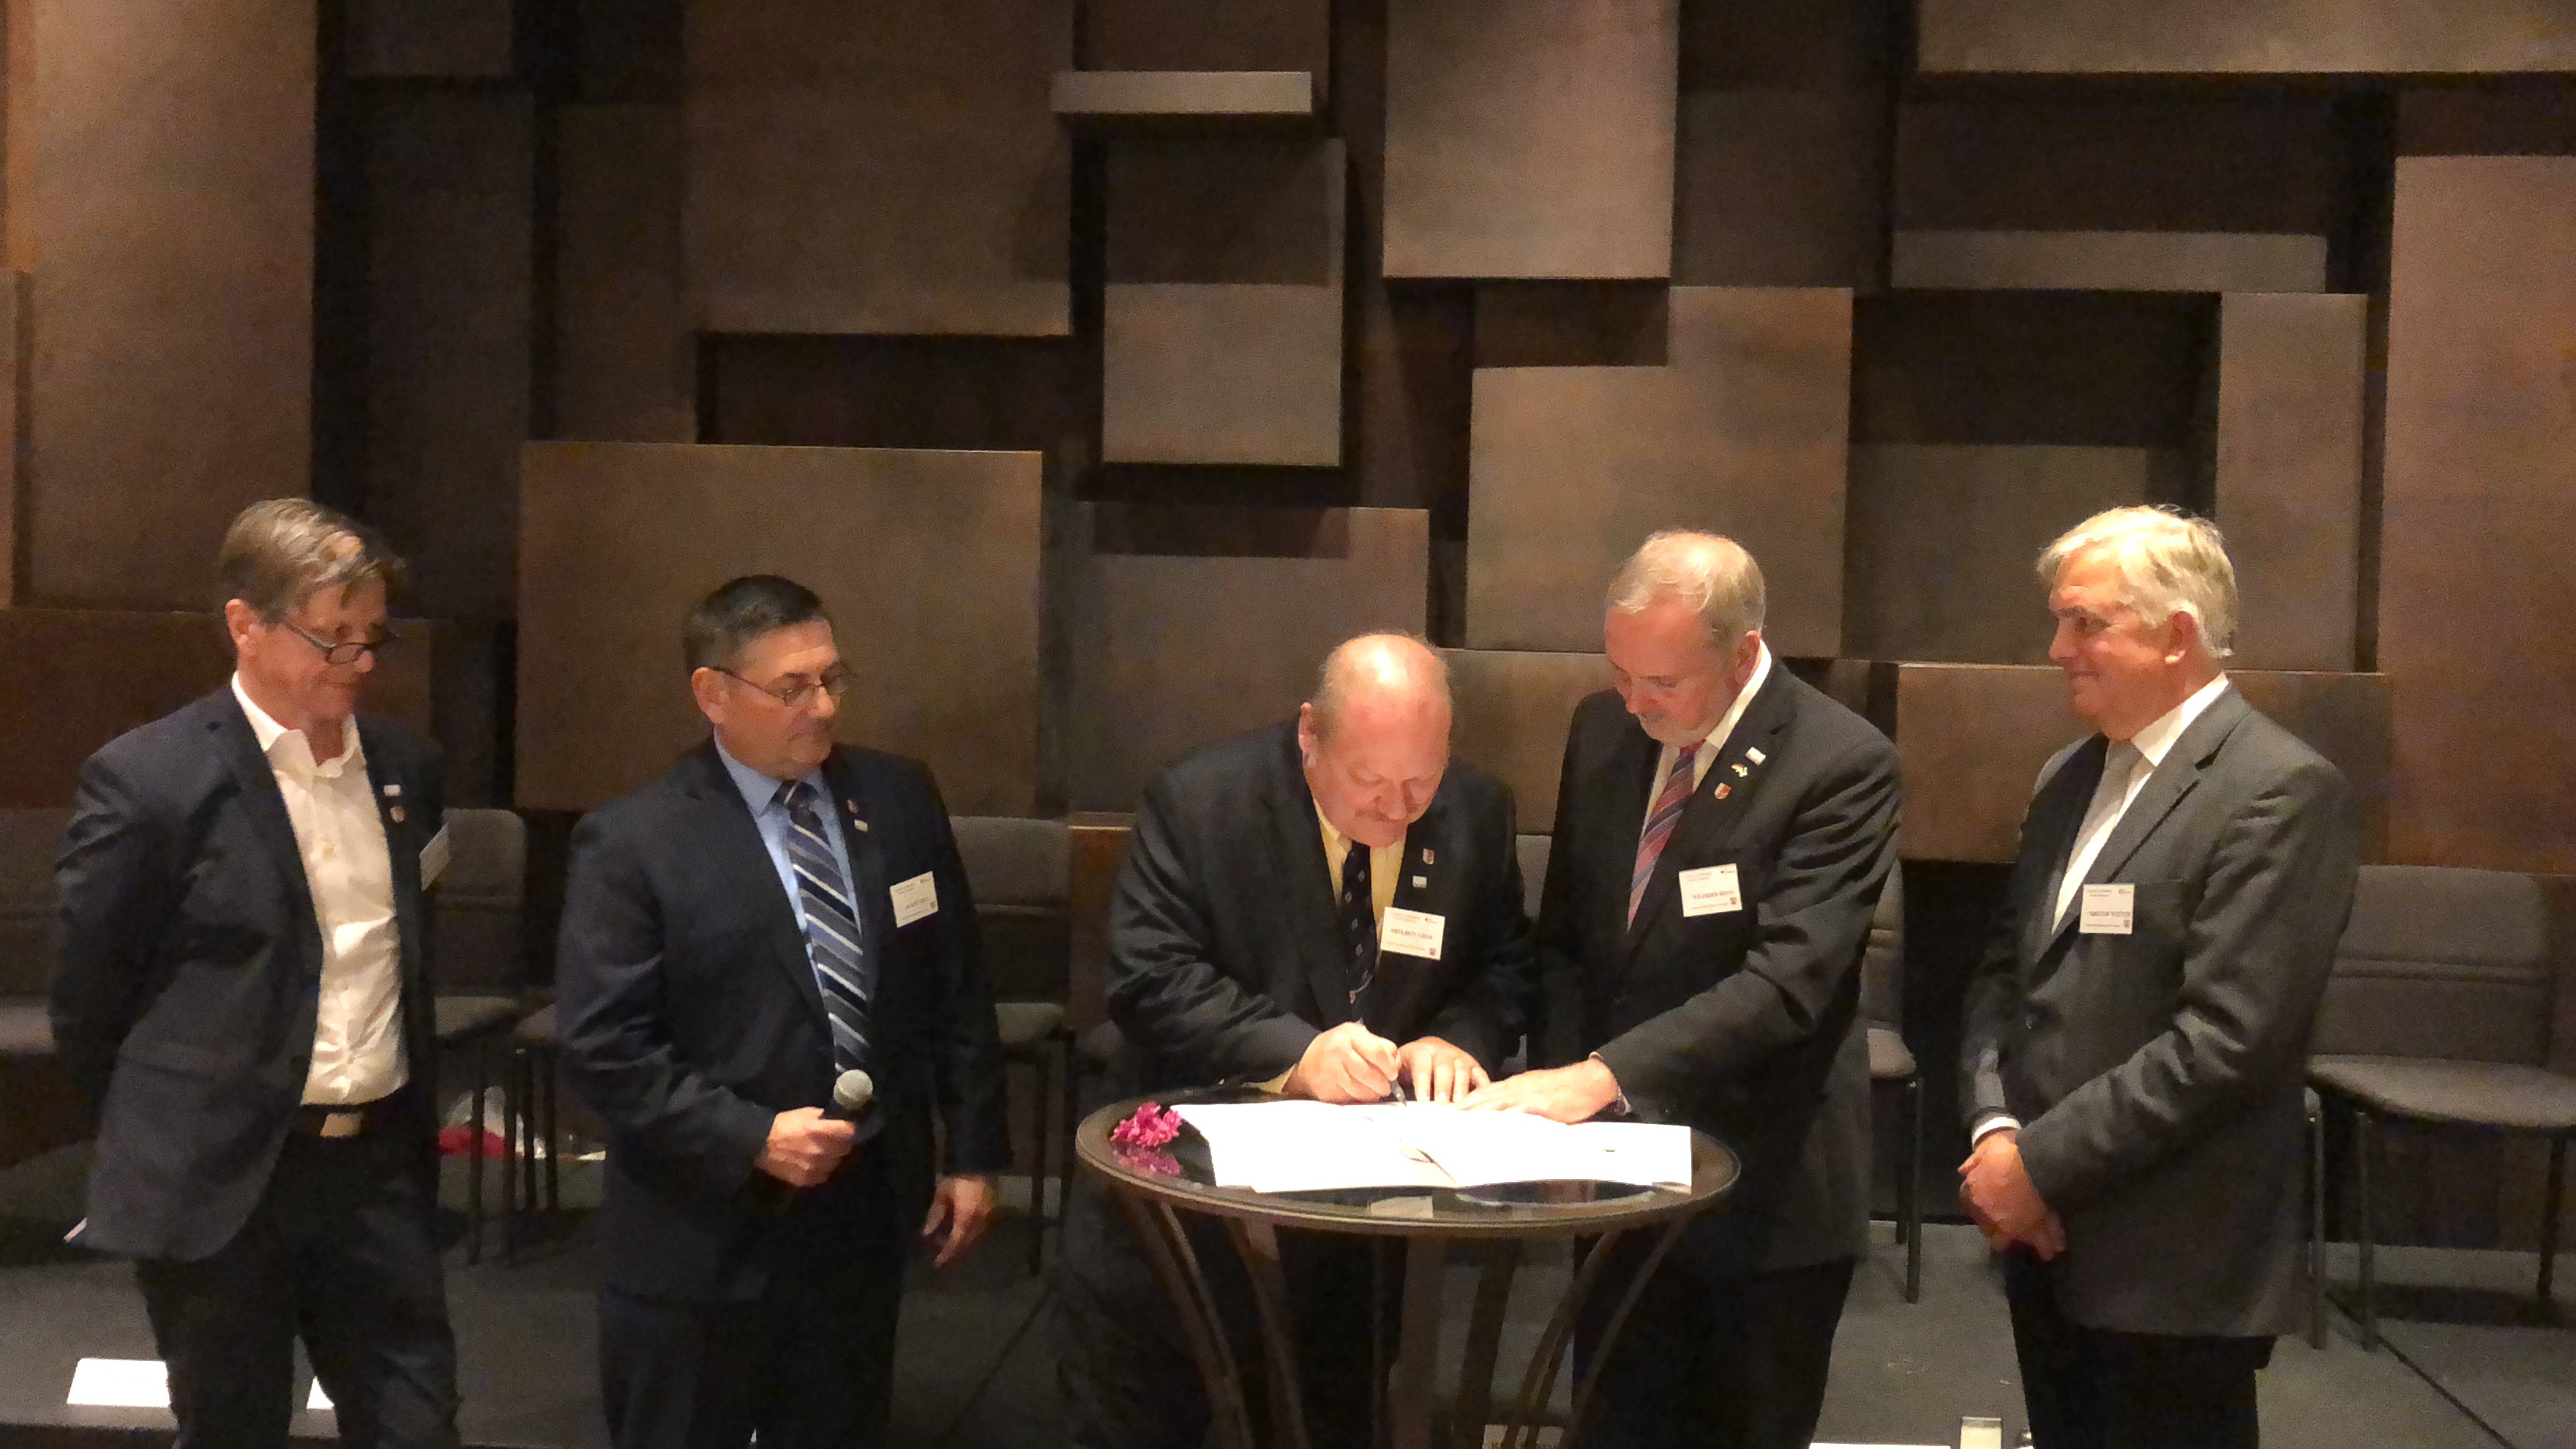 Photo of the signing of the second and perpetual Climate Protection Partner Agreement with representatives from the City of Morris and the City of Saerbeck, Germany.